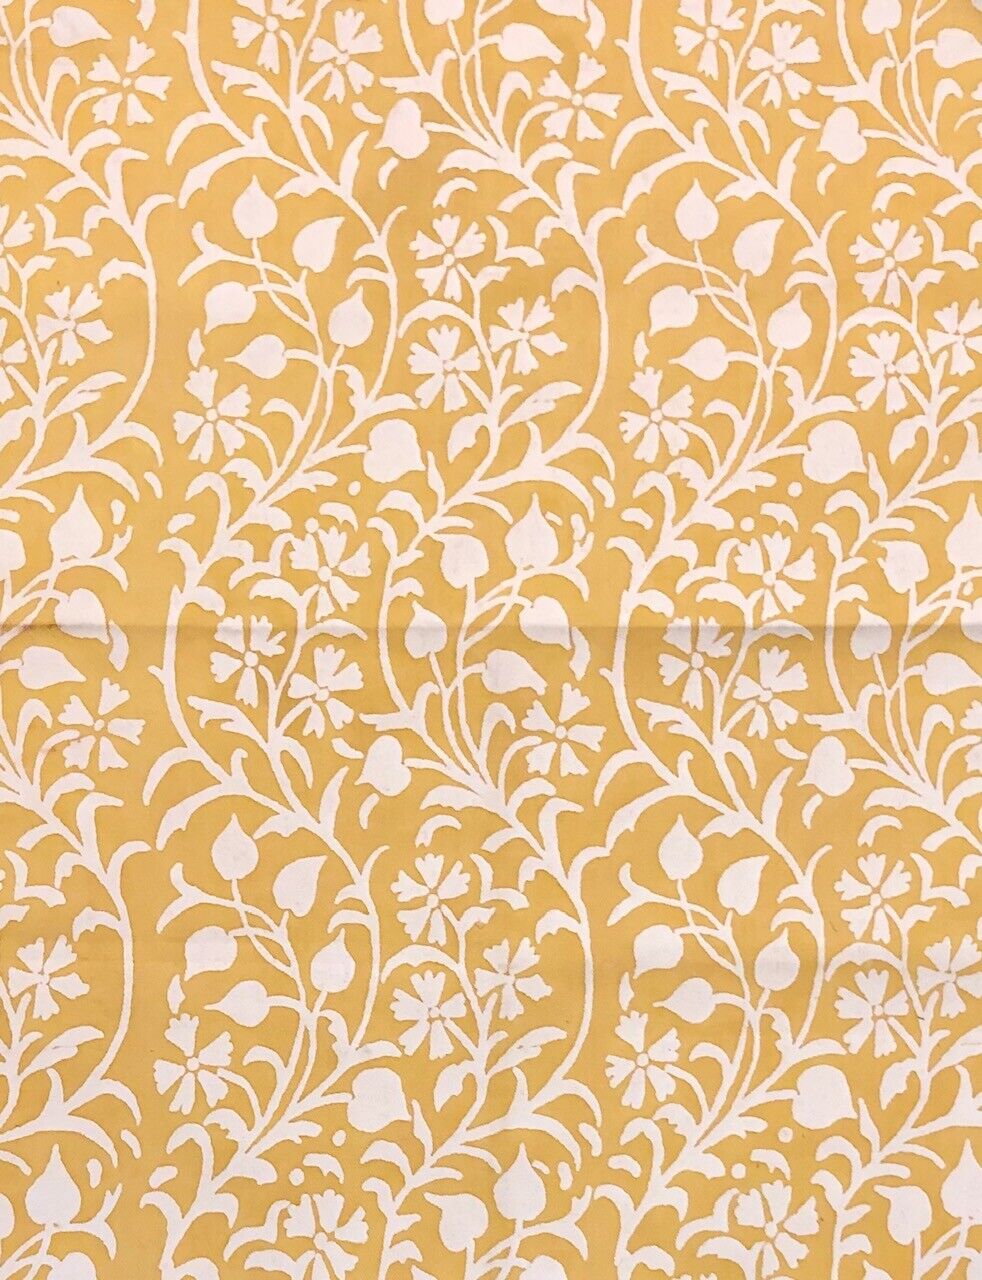 GROVES BROS Nancy Mimosa Yellow Cotton Remnant New